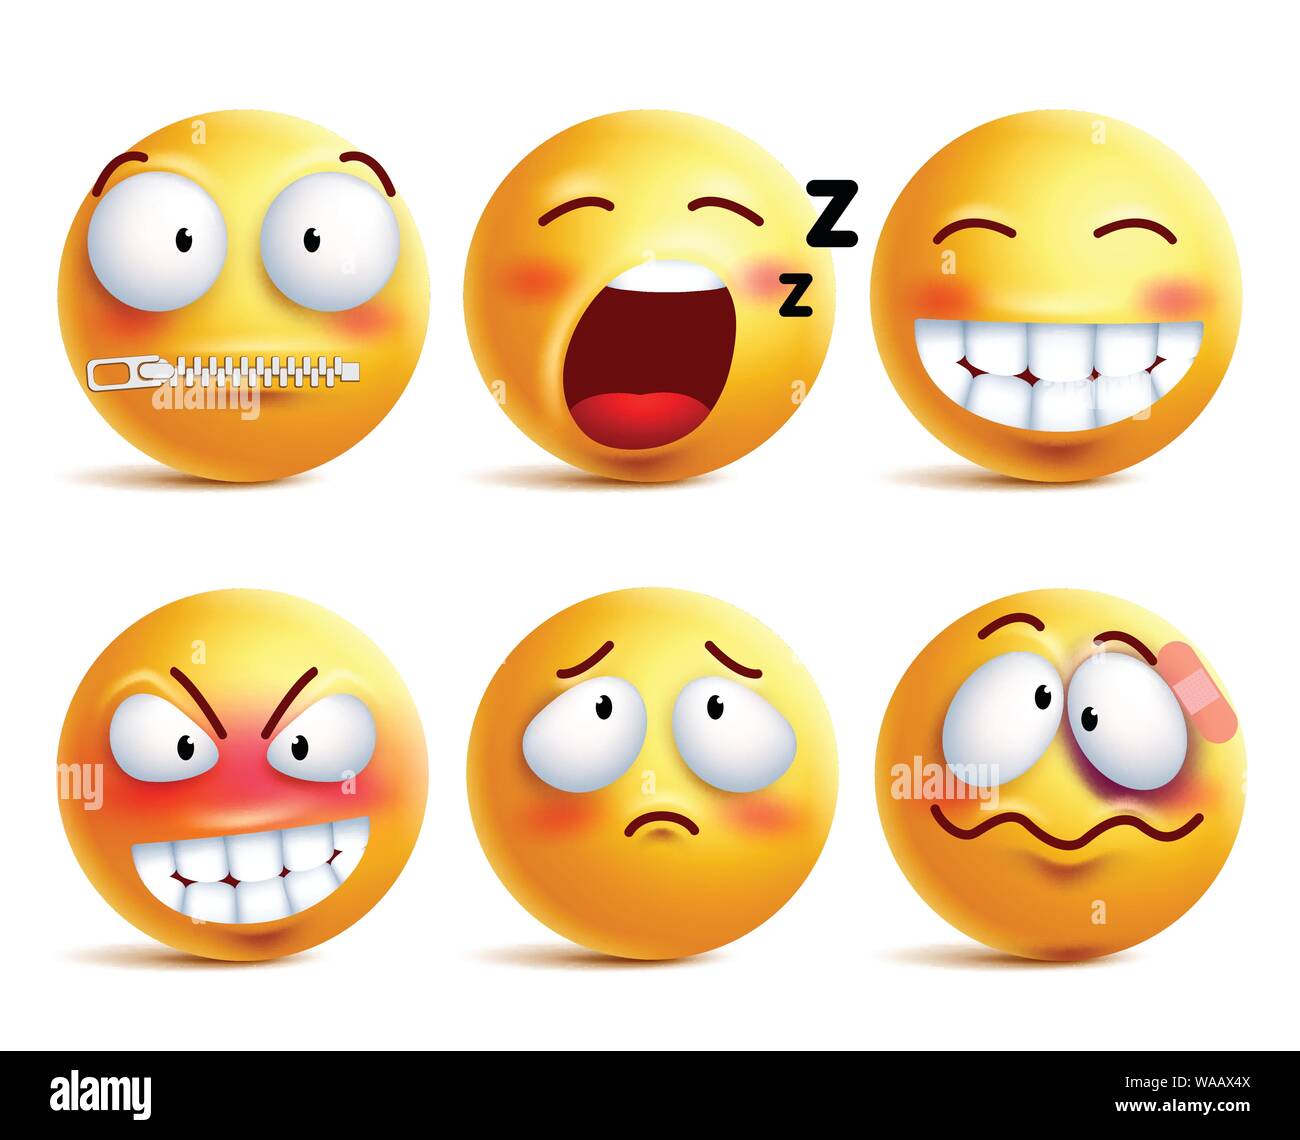 Smileys vector set. Yellow smiley face or emoticons with facial expressions and emotions like happy, zipped, sleepy and beaten isolated in white Stock Vector